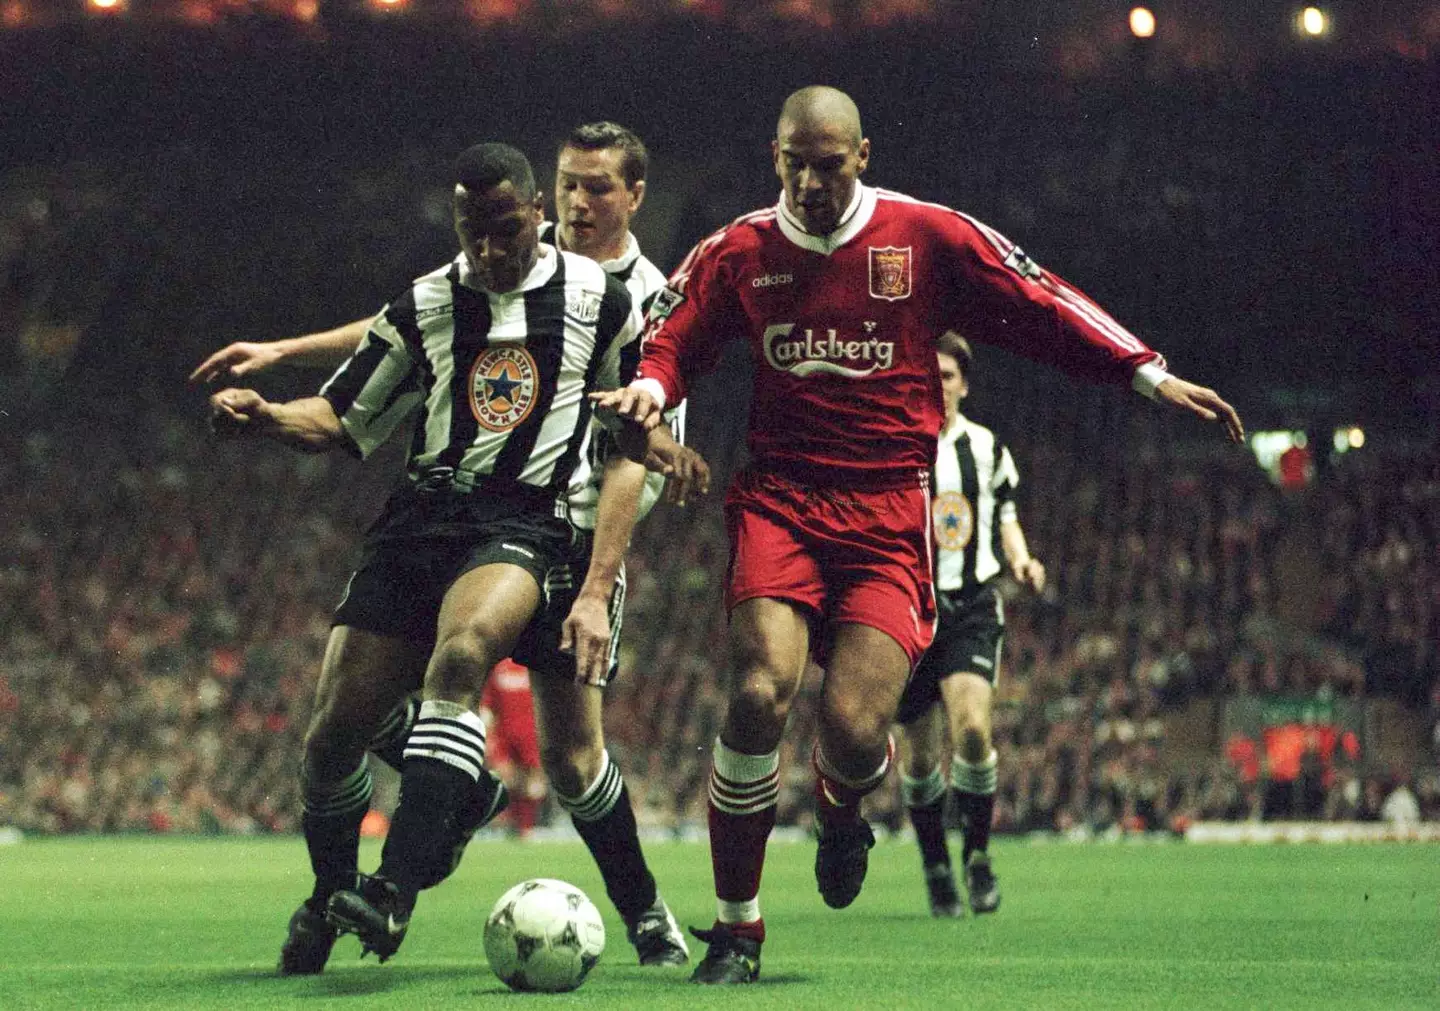 Stan Collymore scored a late winner for Liverpool against Newcastle (